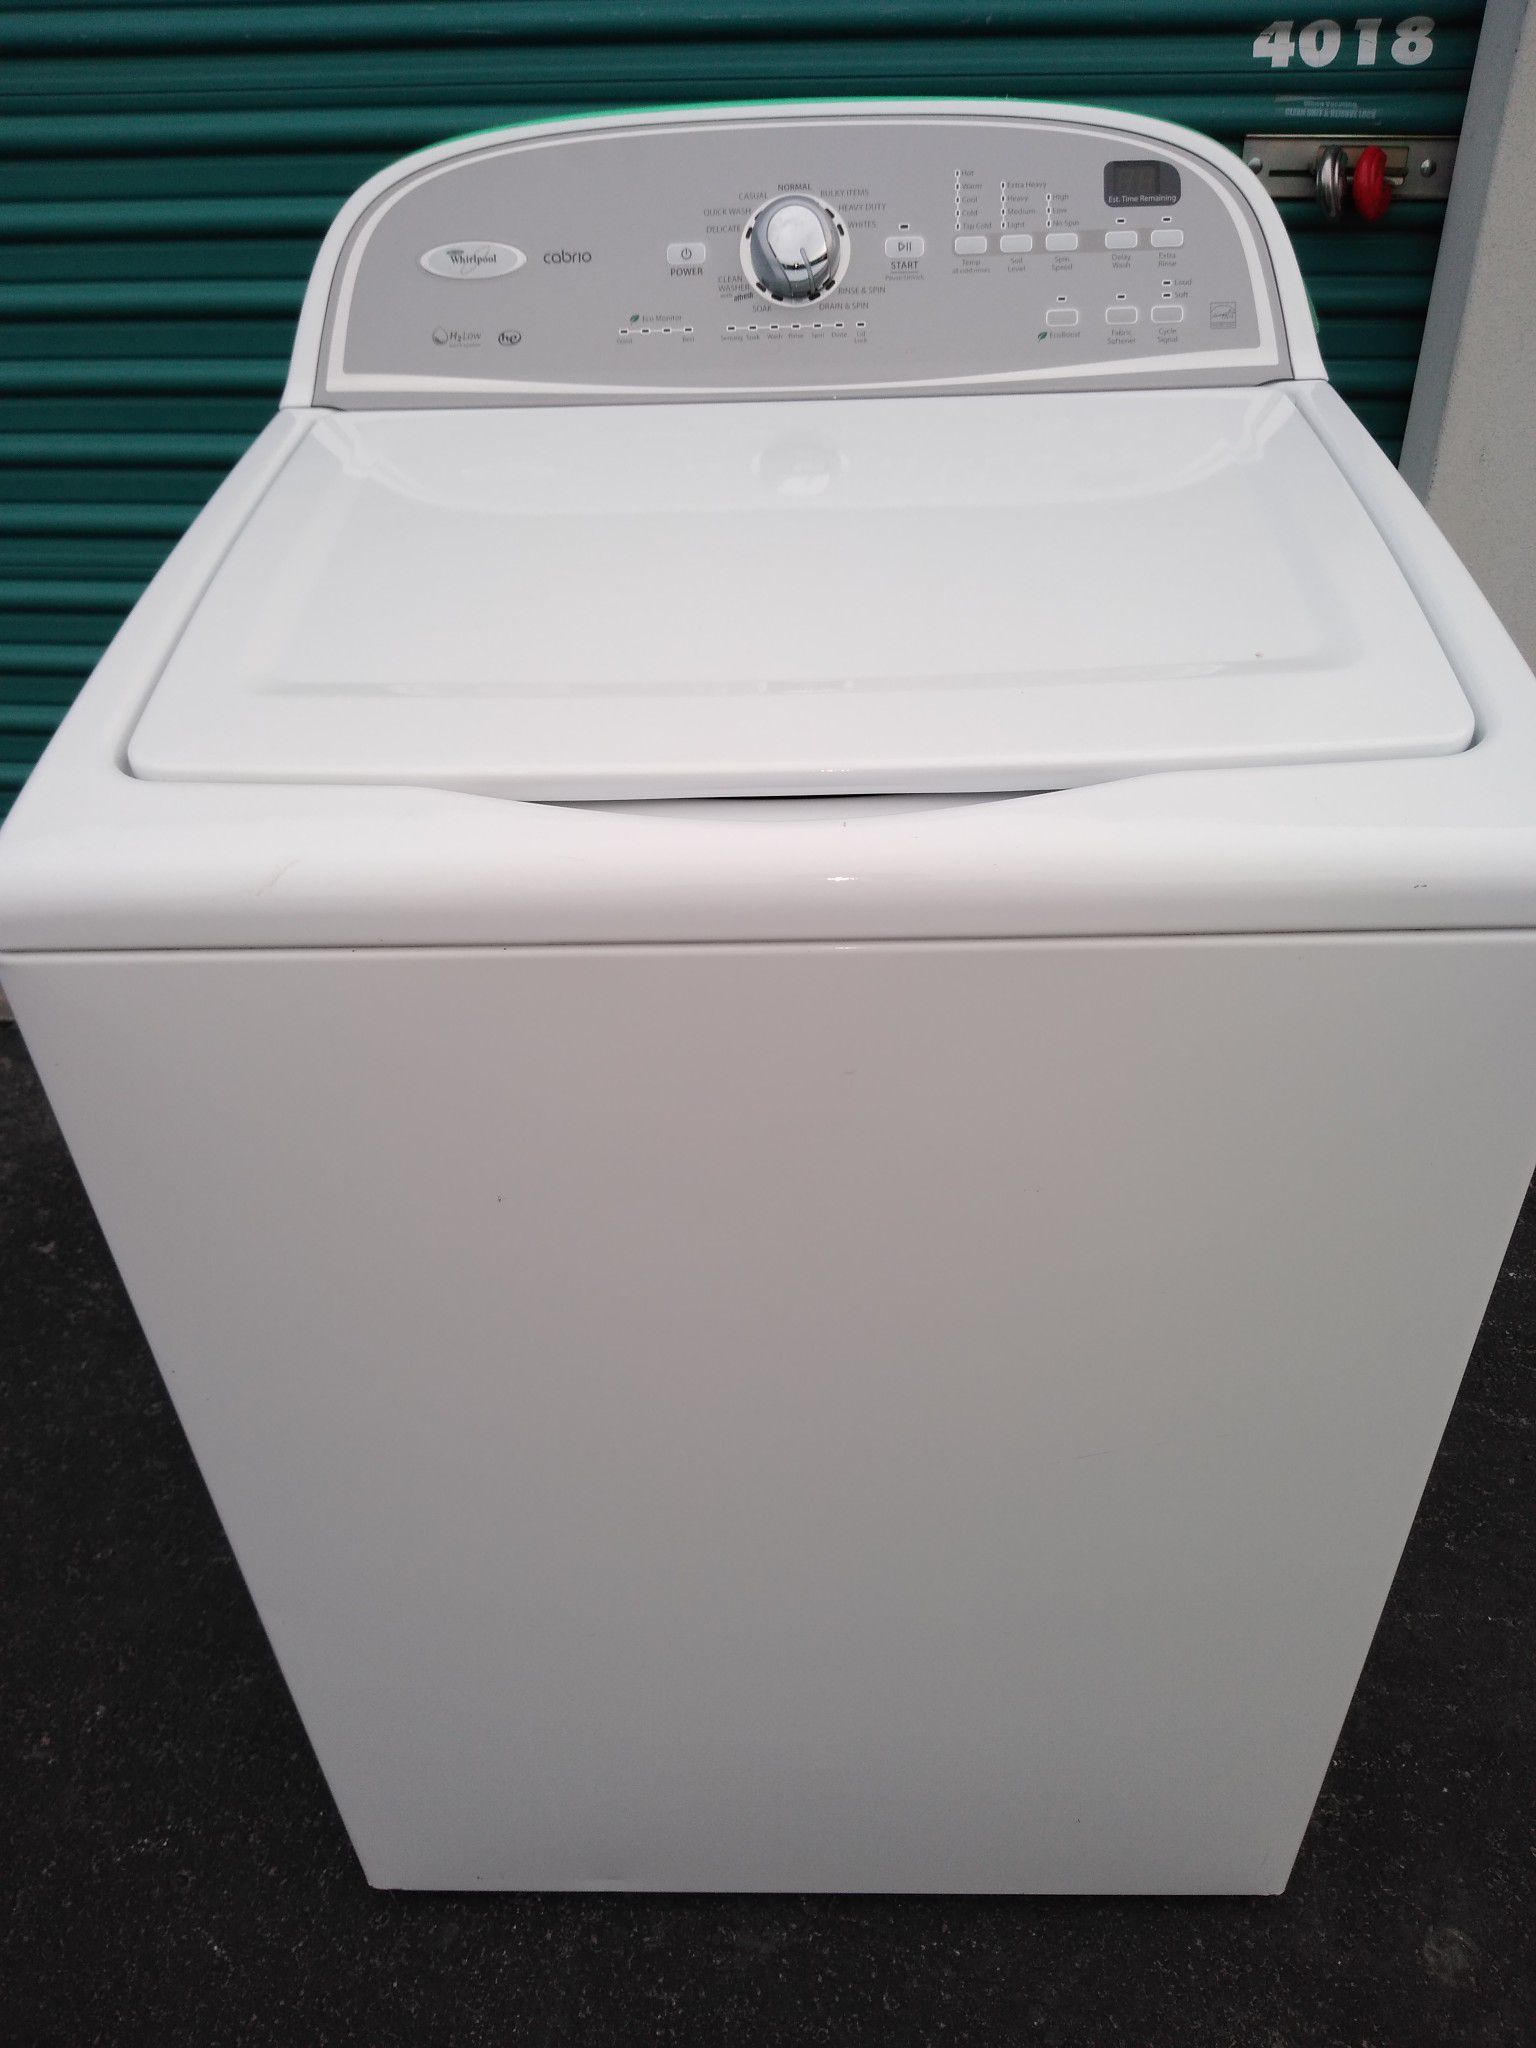 Whirlpool cabrio washer working great 30 days warranty free delivery and installation